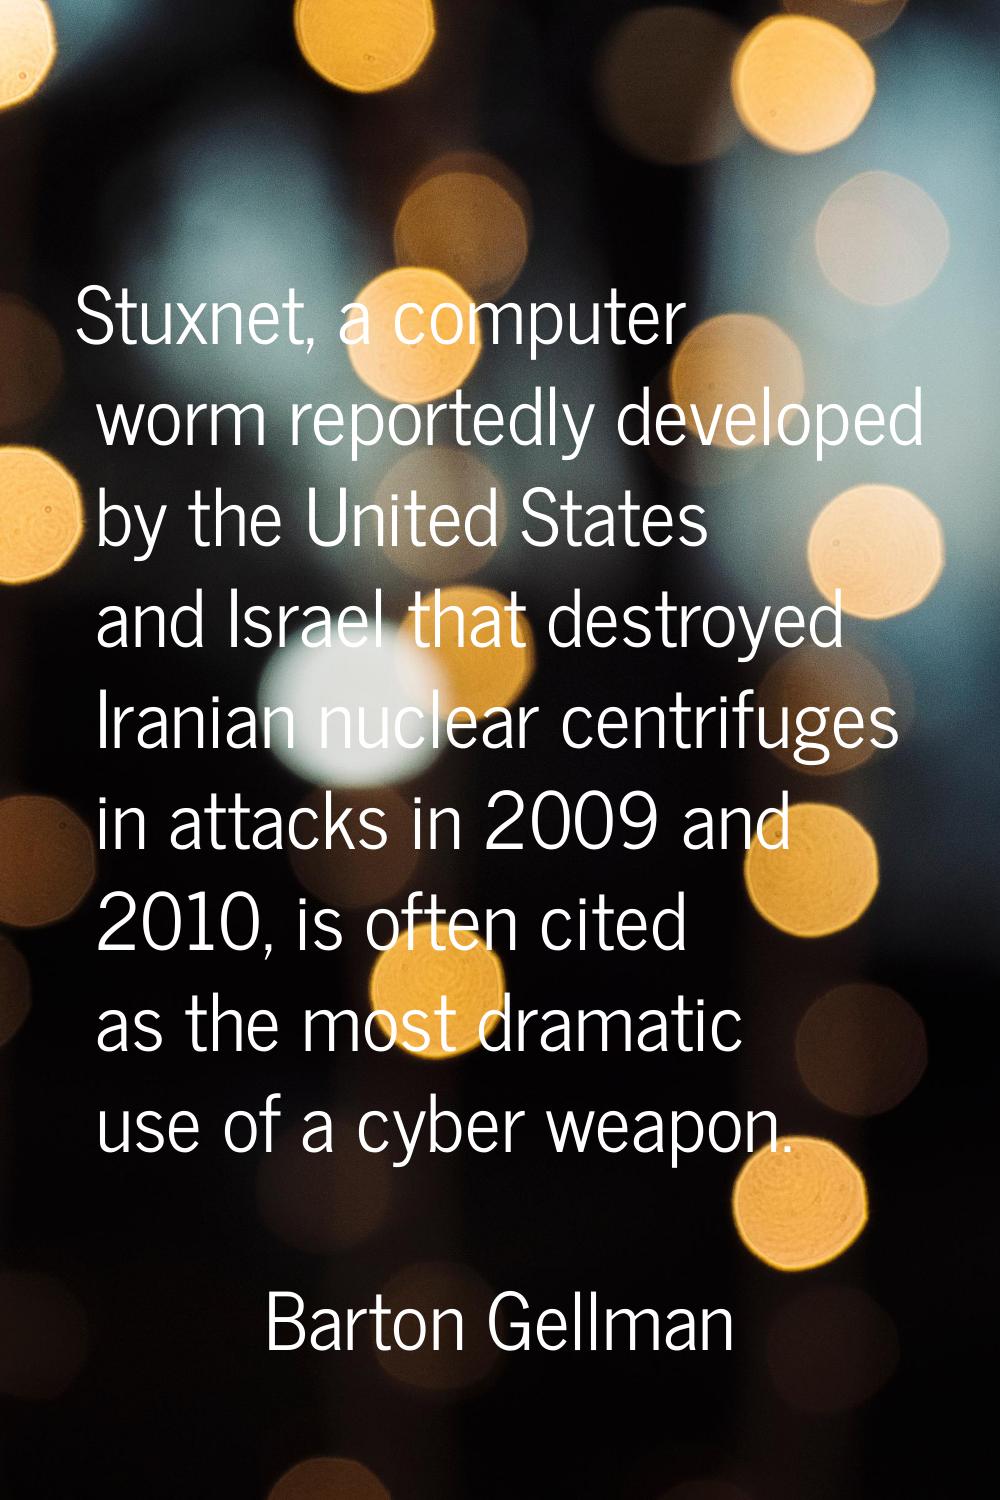 Stuxnet, a computer worm reportedly developed by the United States and Israel that destroyed Irania